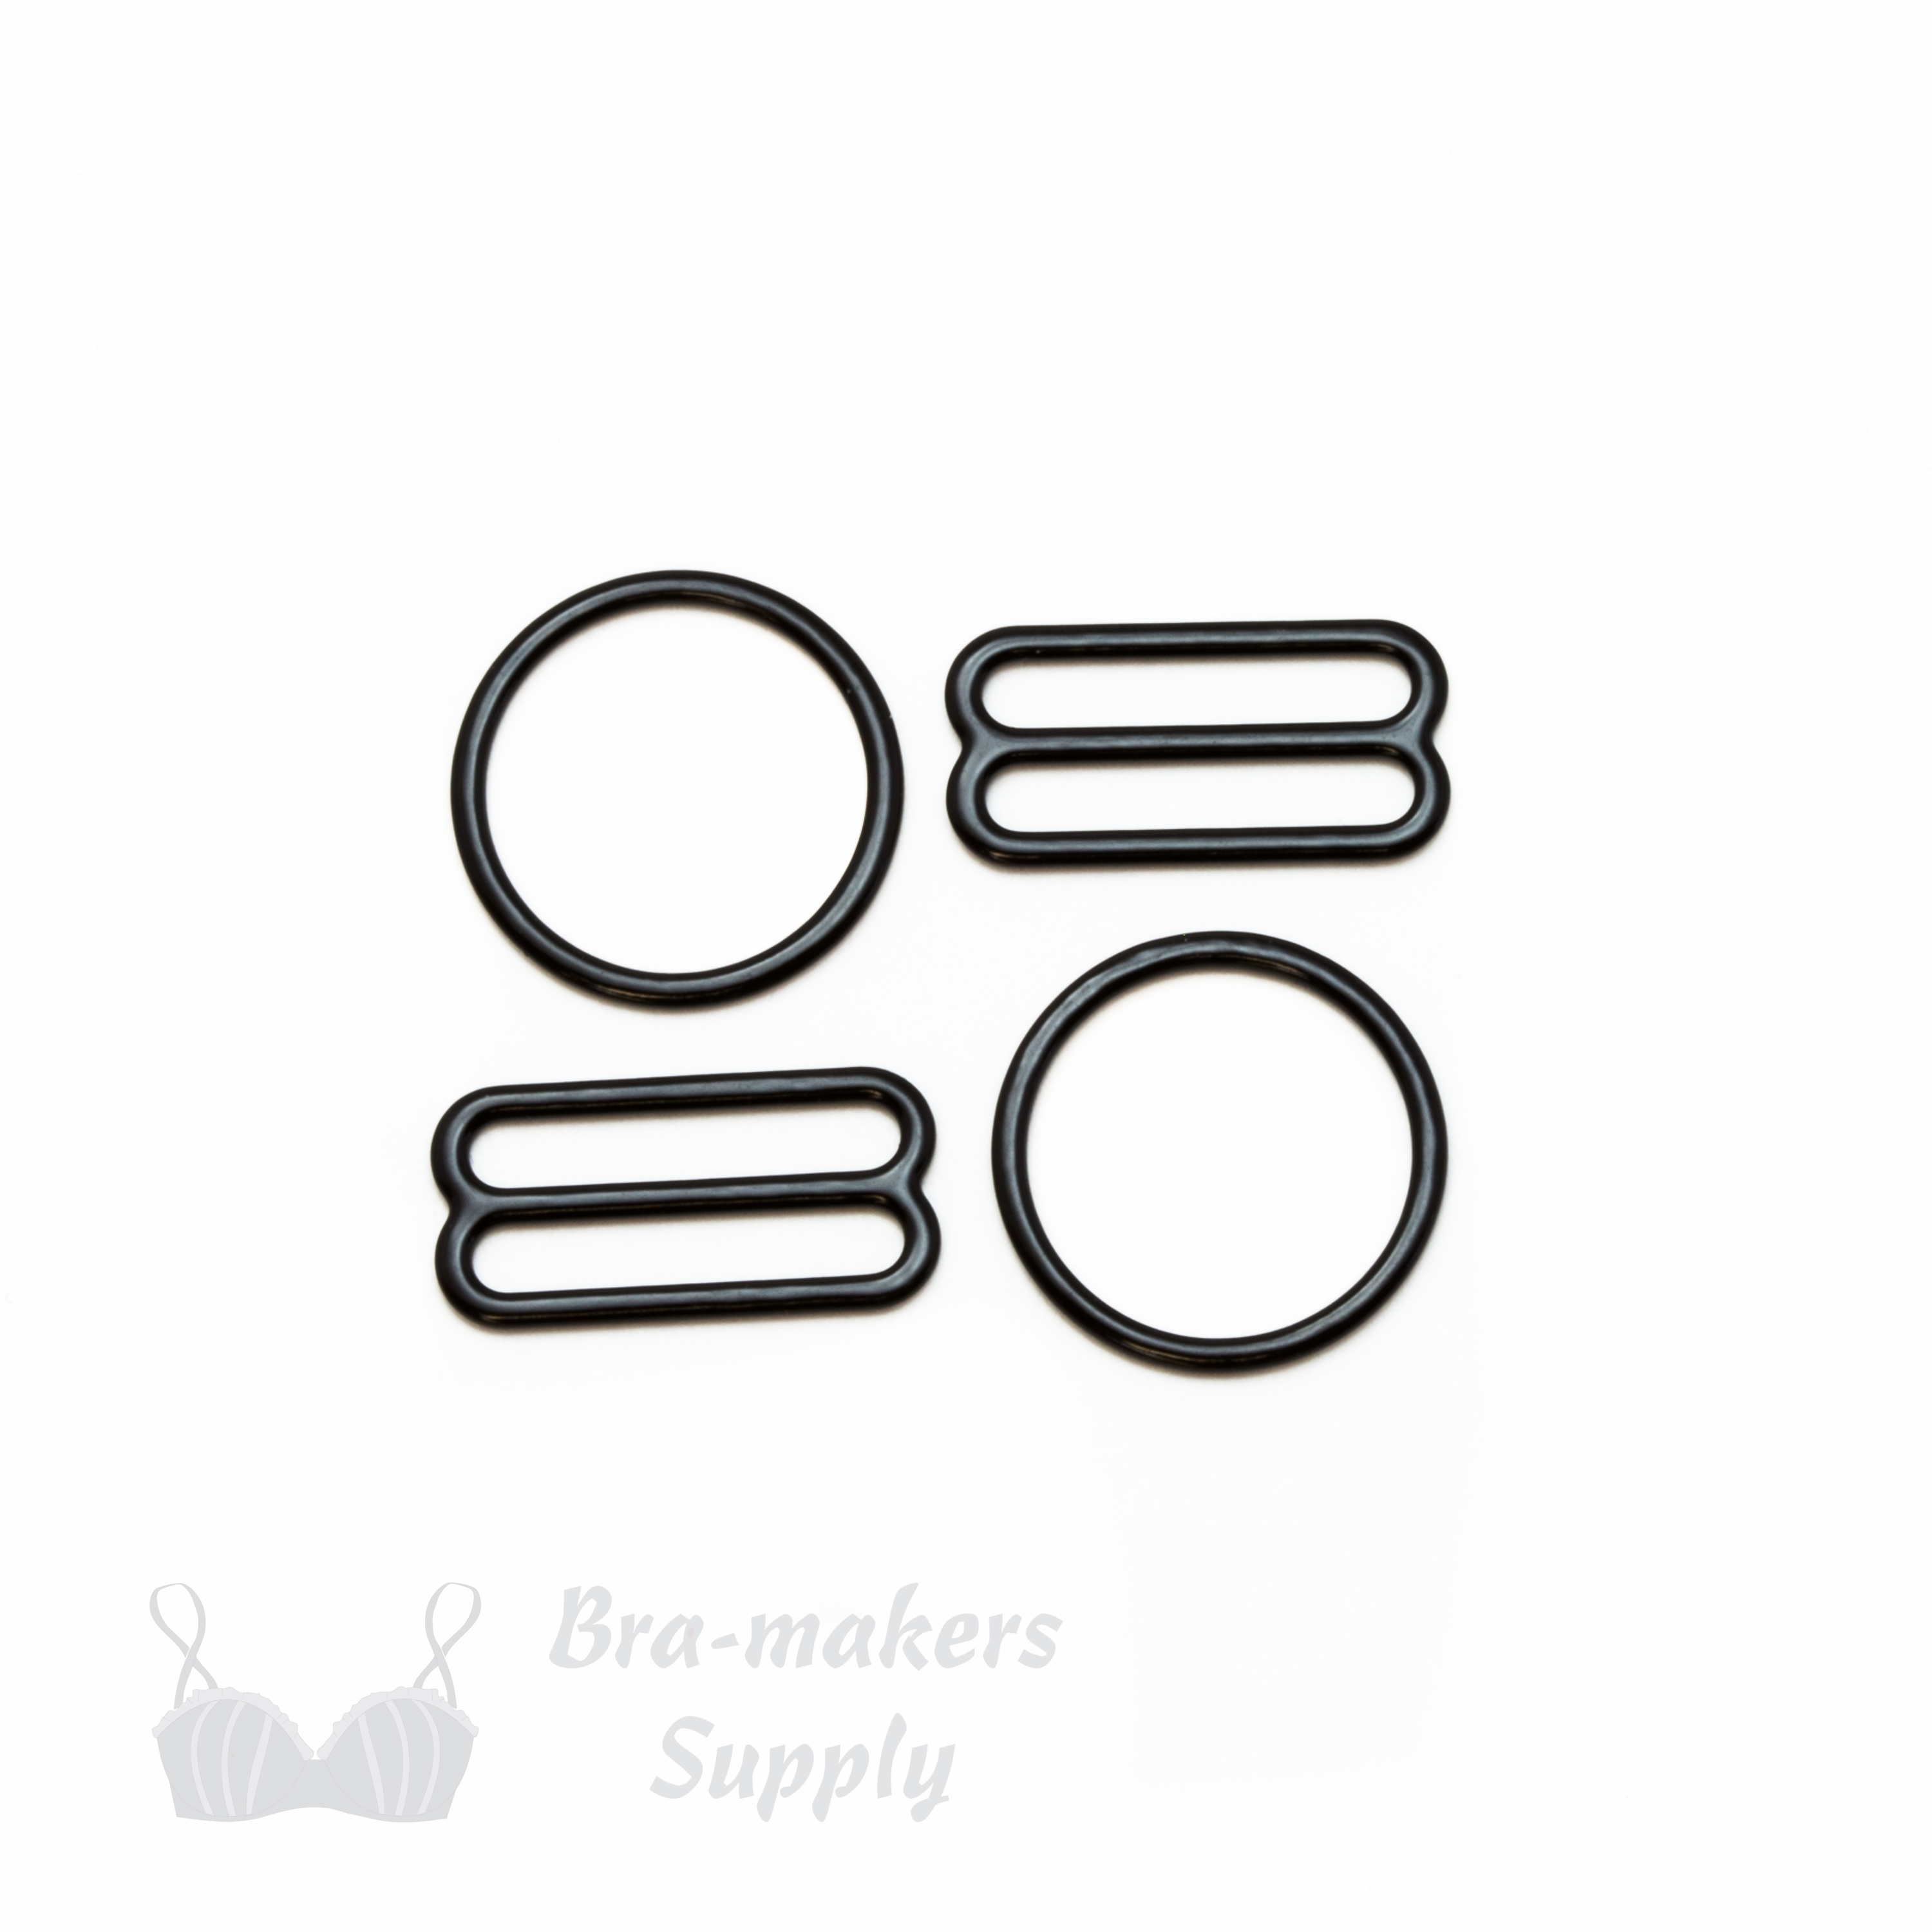 three quarters inch 19mm RM-6 black nylon coated metal rings sliders or anthracite Pantone 19-4007 from Bra-Makers Supply 2 sliders 2 rings shown